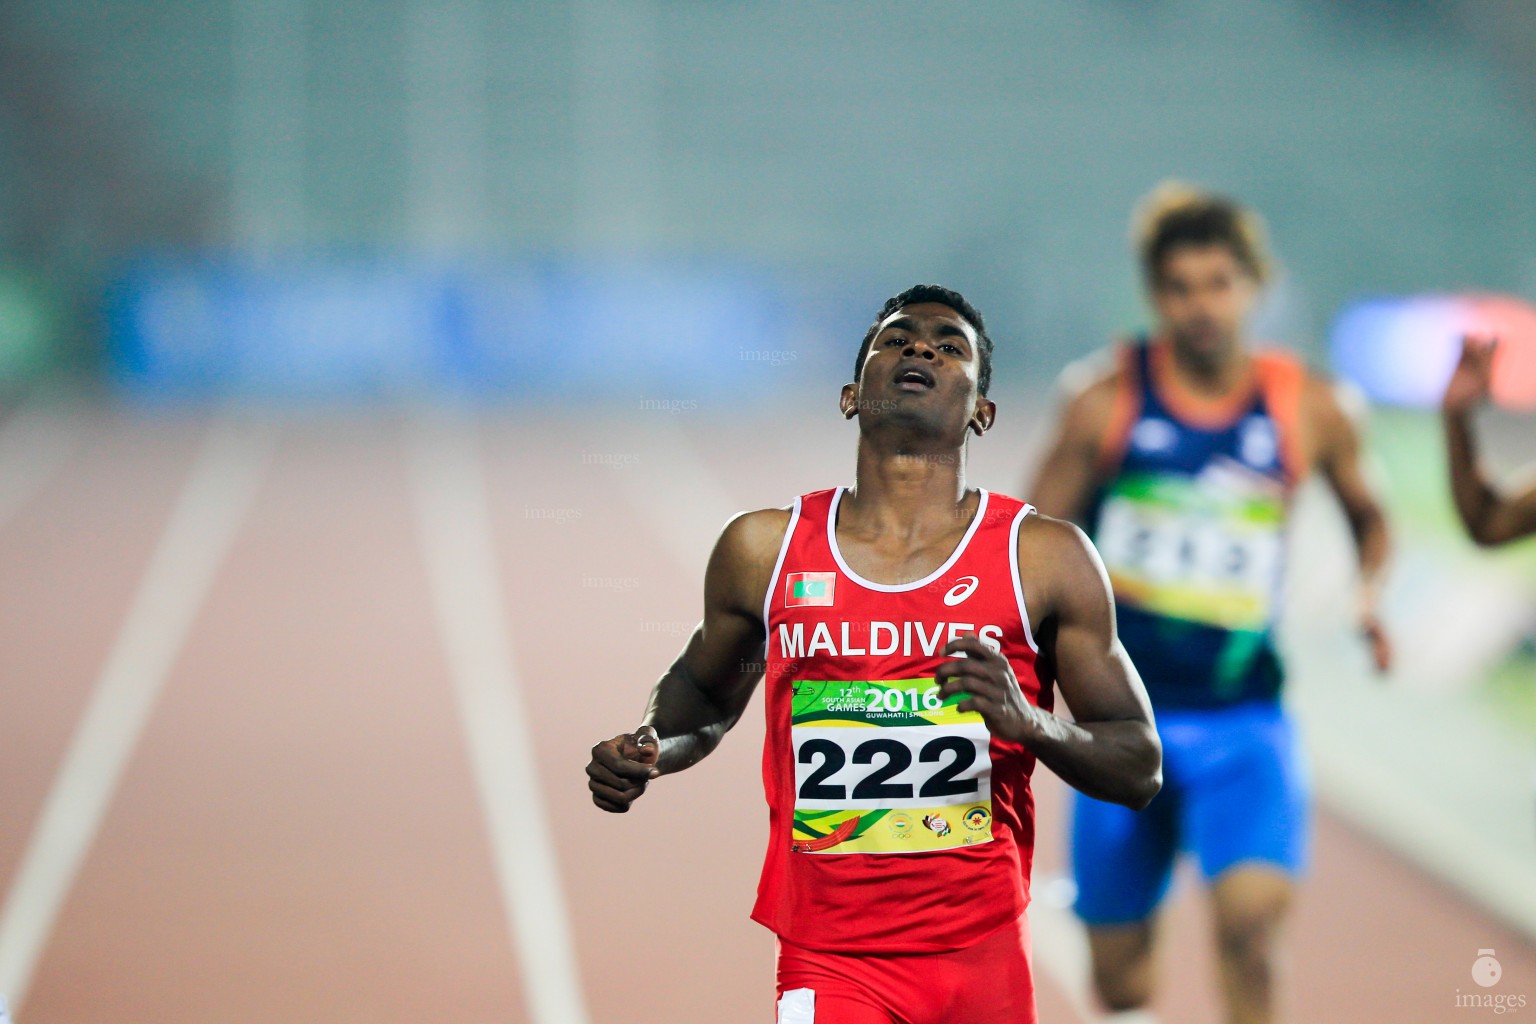 Hassan Saaid runs in the 200m finals in the South Asian Games in Guwahati, India, Thursday, February. 11, 2016. (Images.mv Photo/ Mohamed Ahsan).